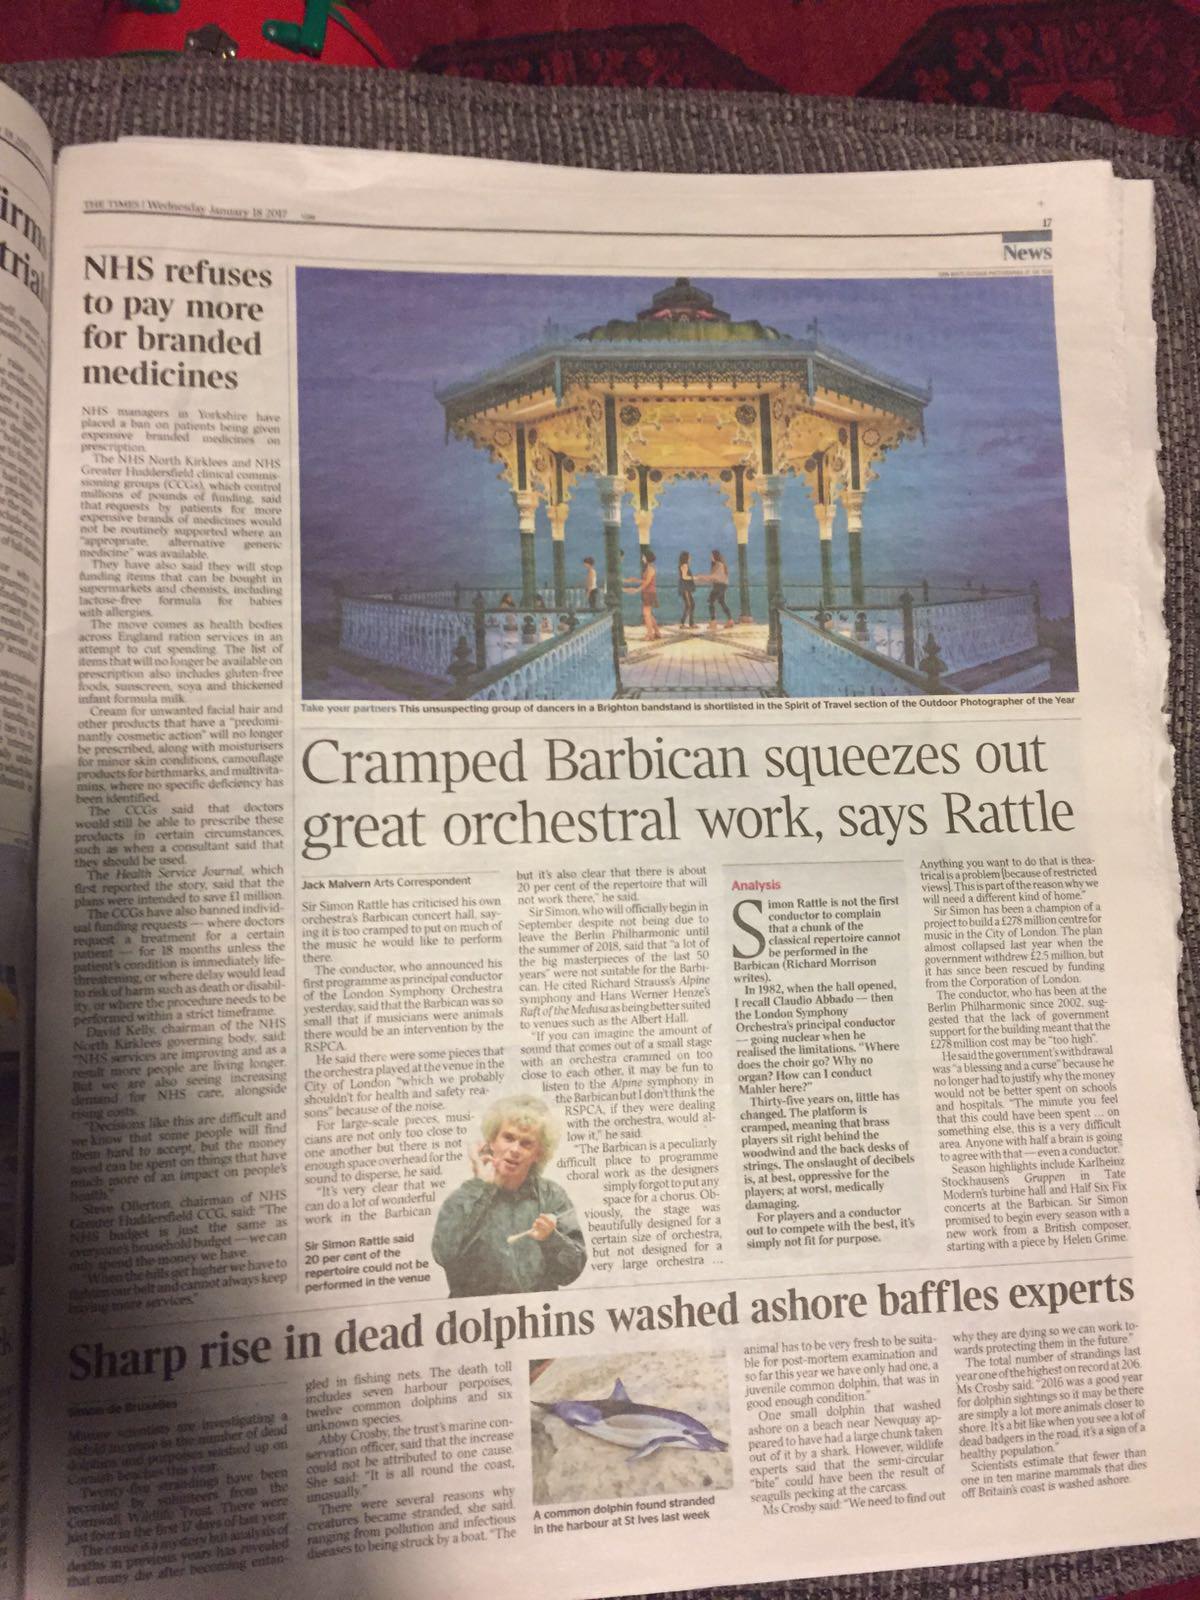 Brighton Bandstand - in the Times